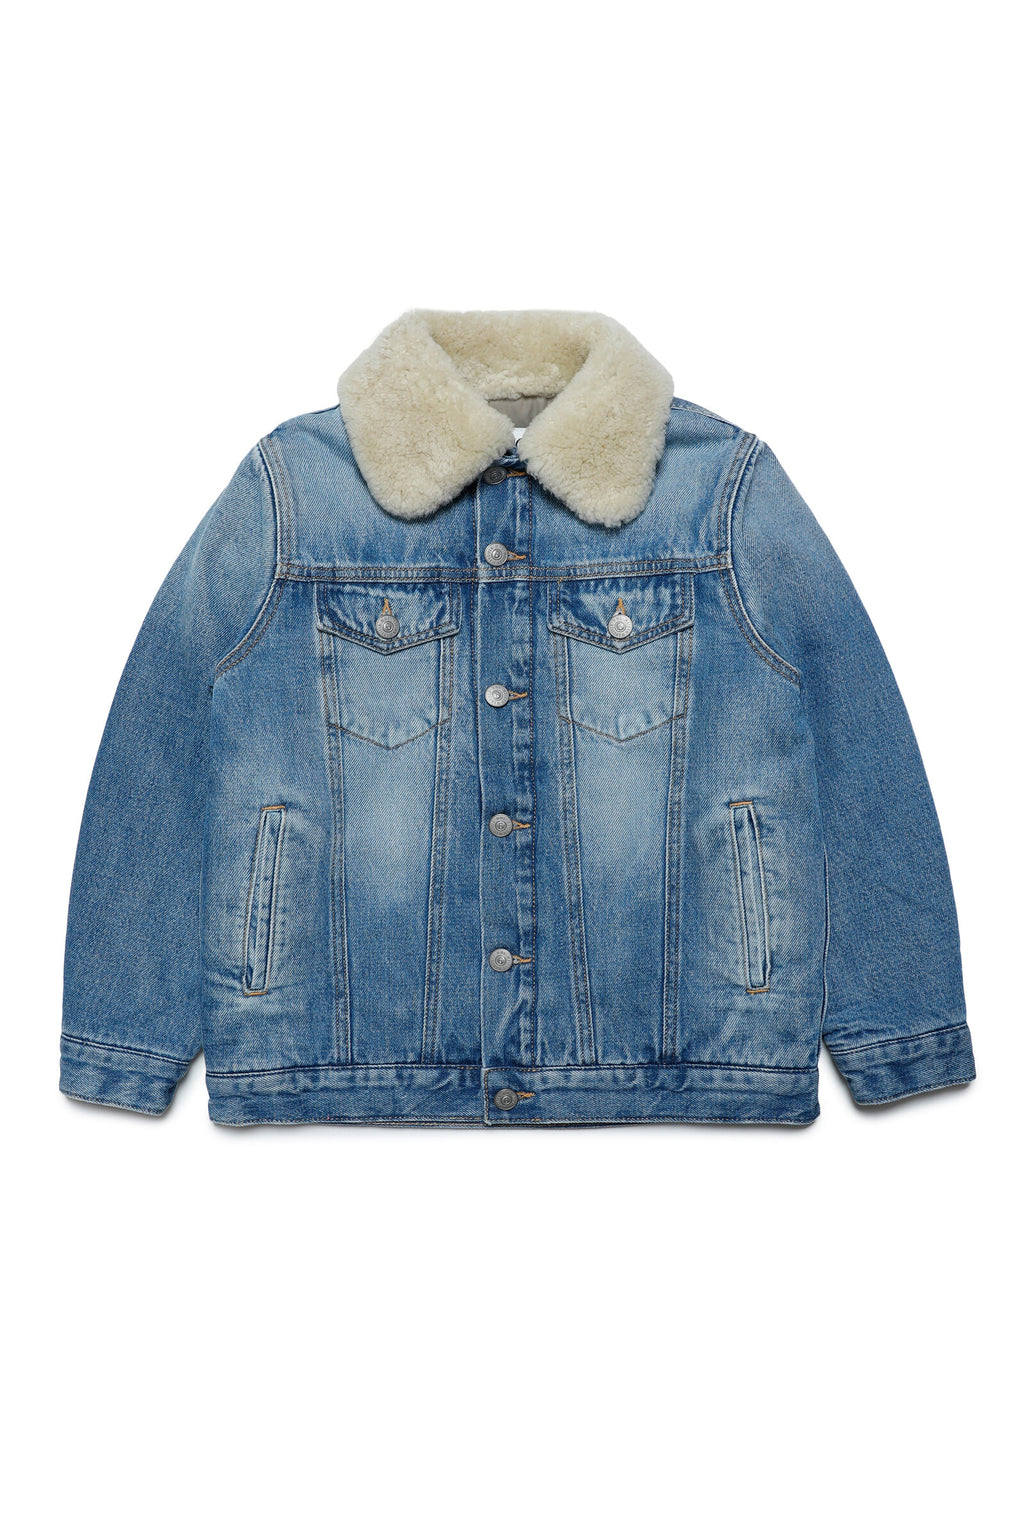 Medium blue shaded jeans jacket with shearling collar